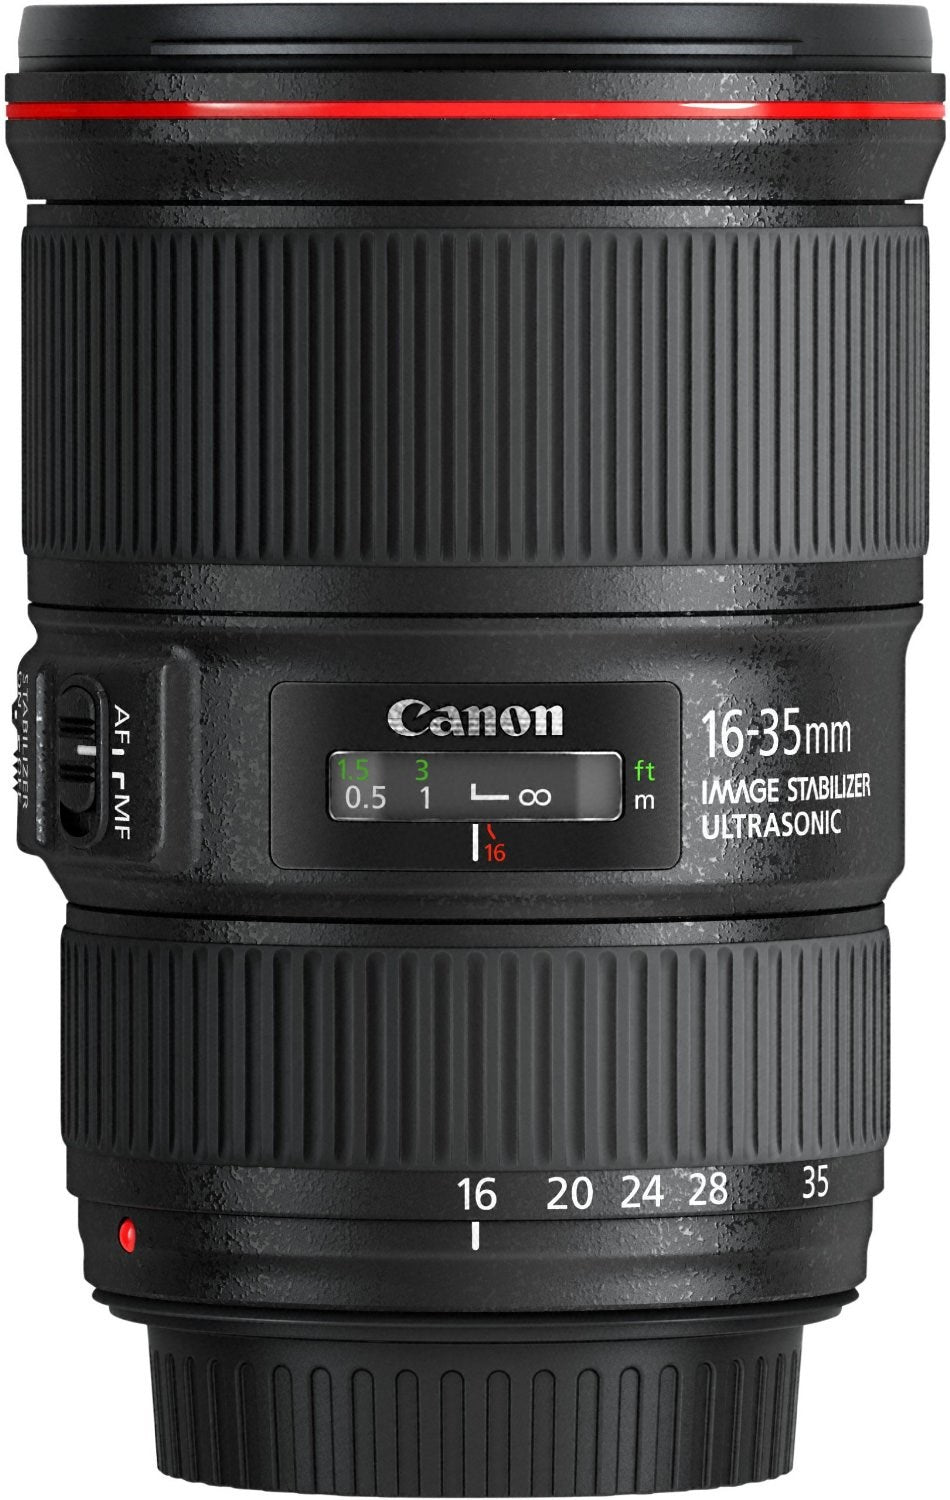 Canon EF 16-35mm f4 L IS USM Ultra Wide-Angle Zoom Lens - Product Photo 1